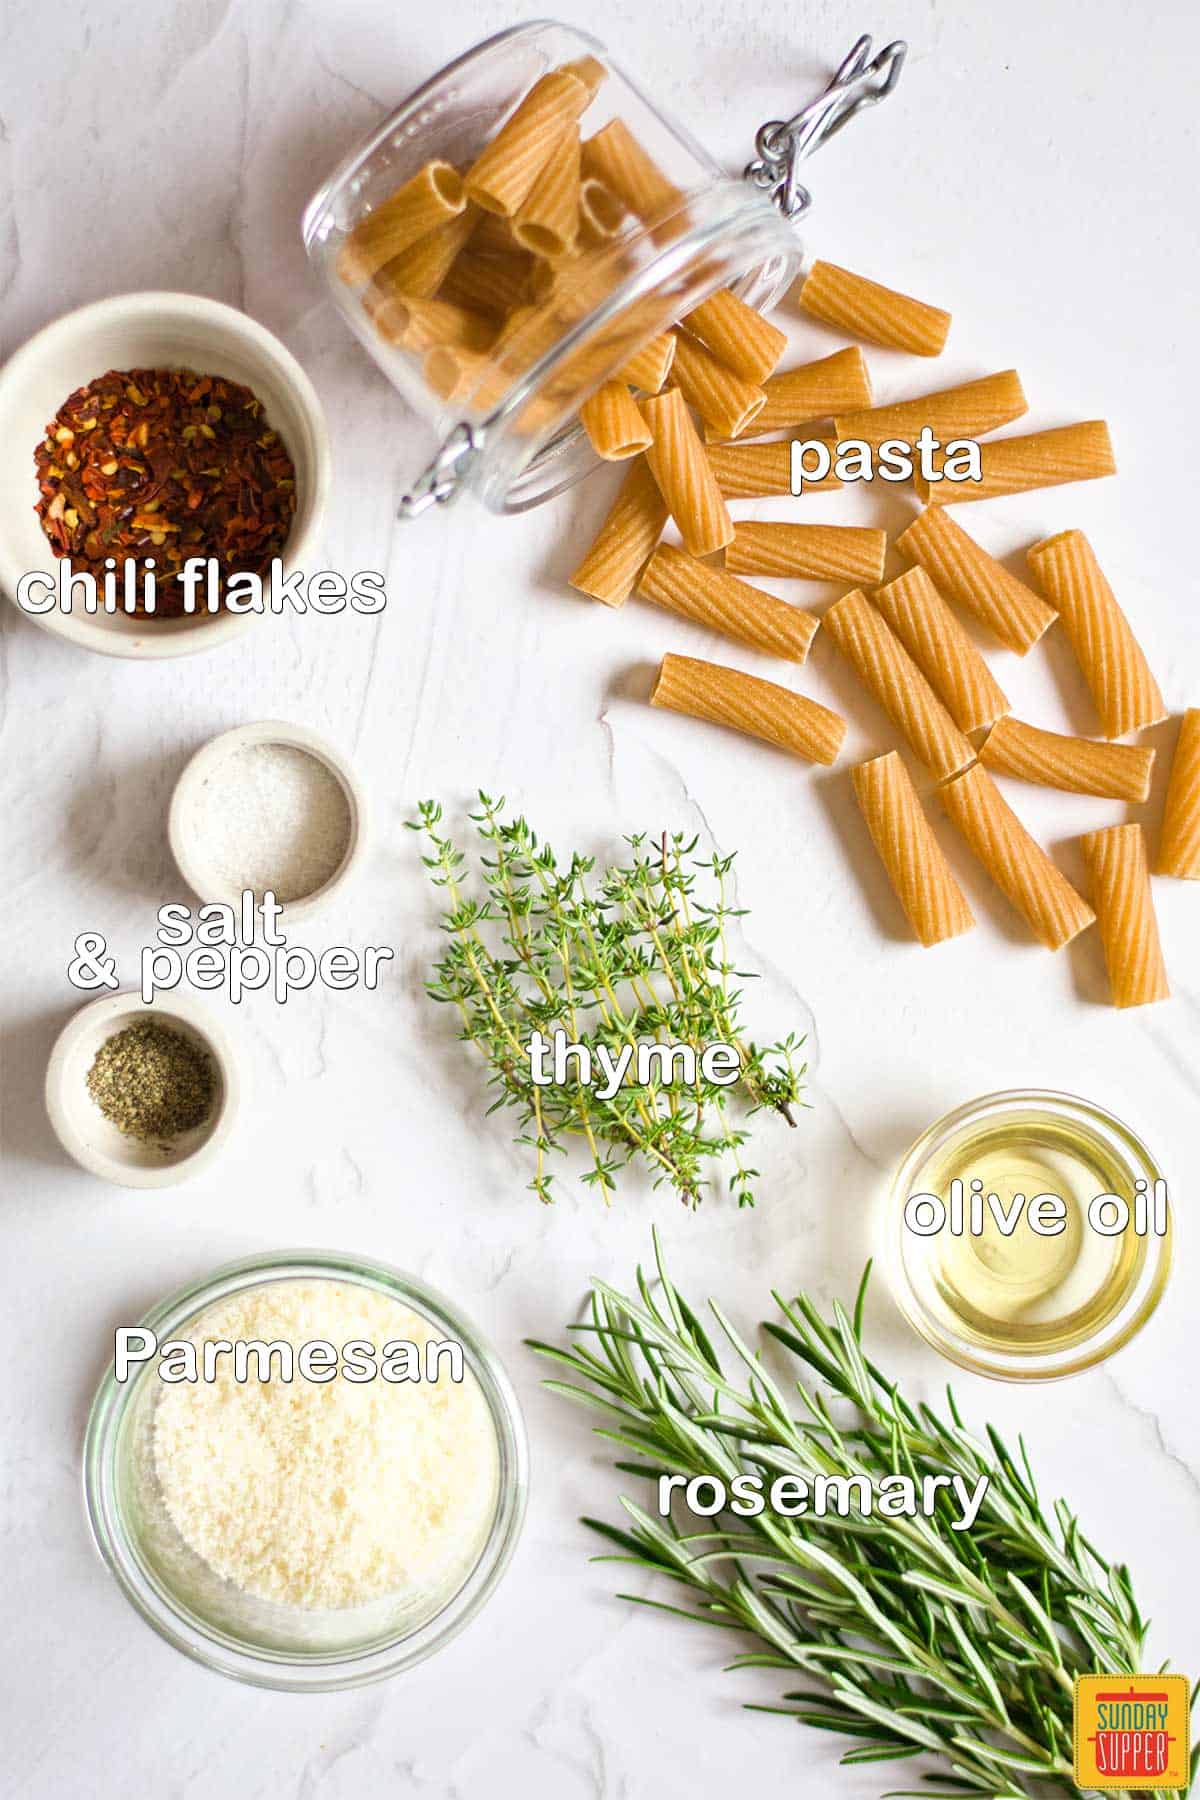 ingredients to make pasta chips with labels